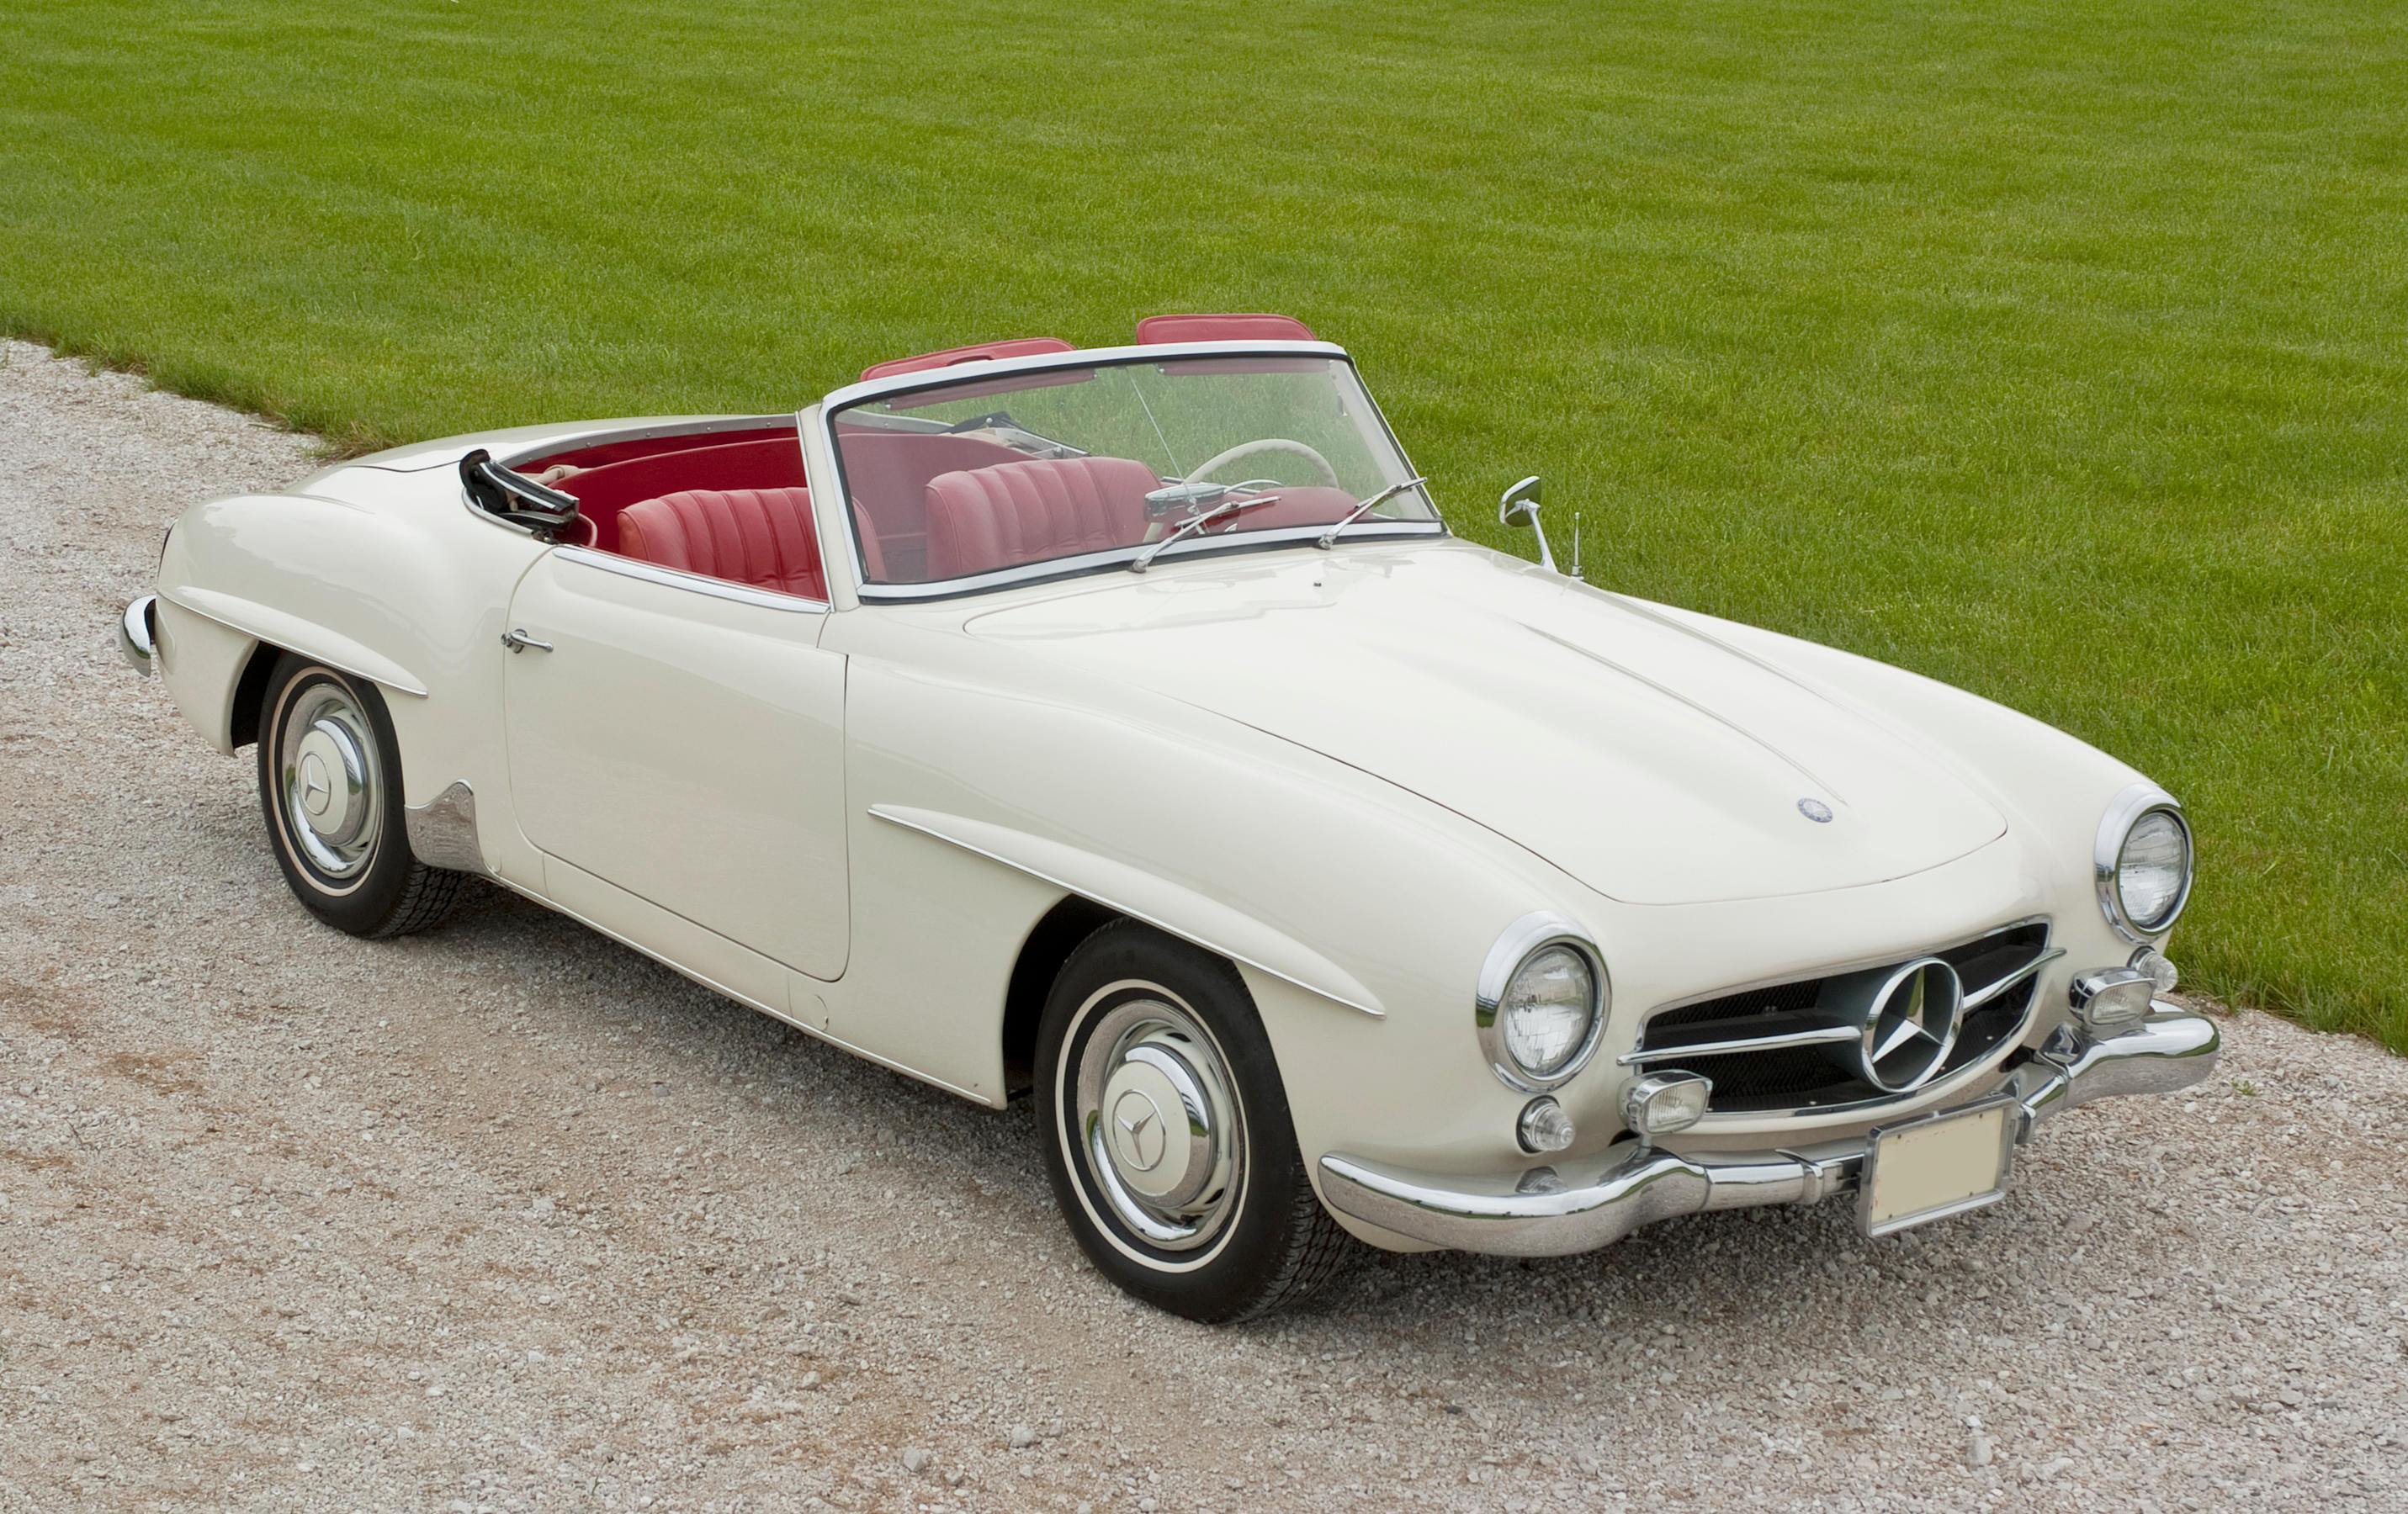 1960 Mercedes-Benz 190SL Roadster with hard top Chassis no. 121042-10-017818